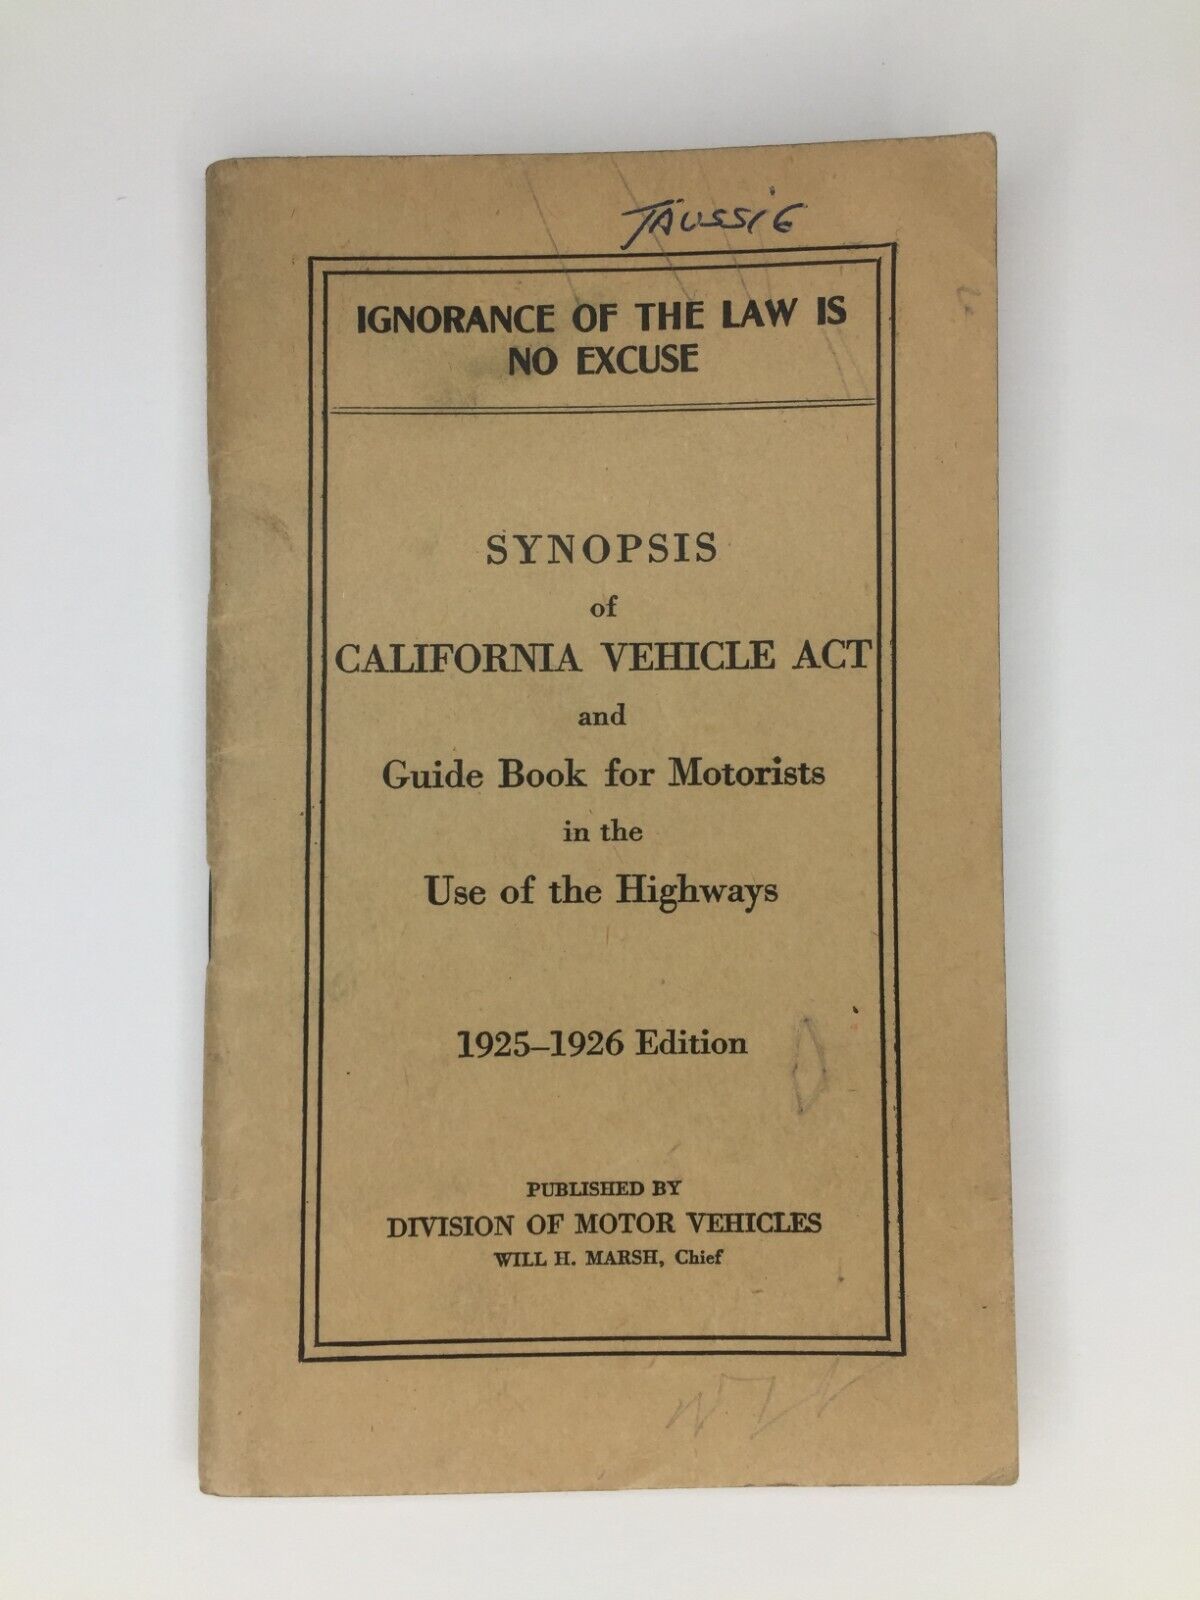 Synopsis of California Vehicle Act 1925-1926 Guide Book Motorists Richfield Gas